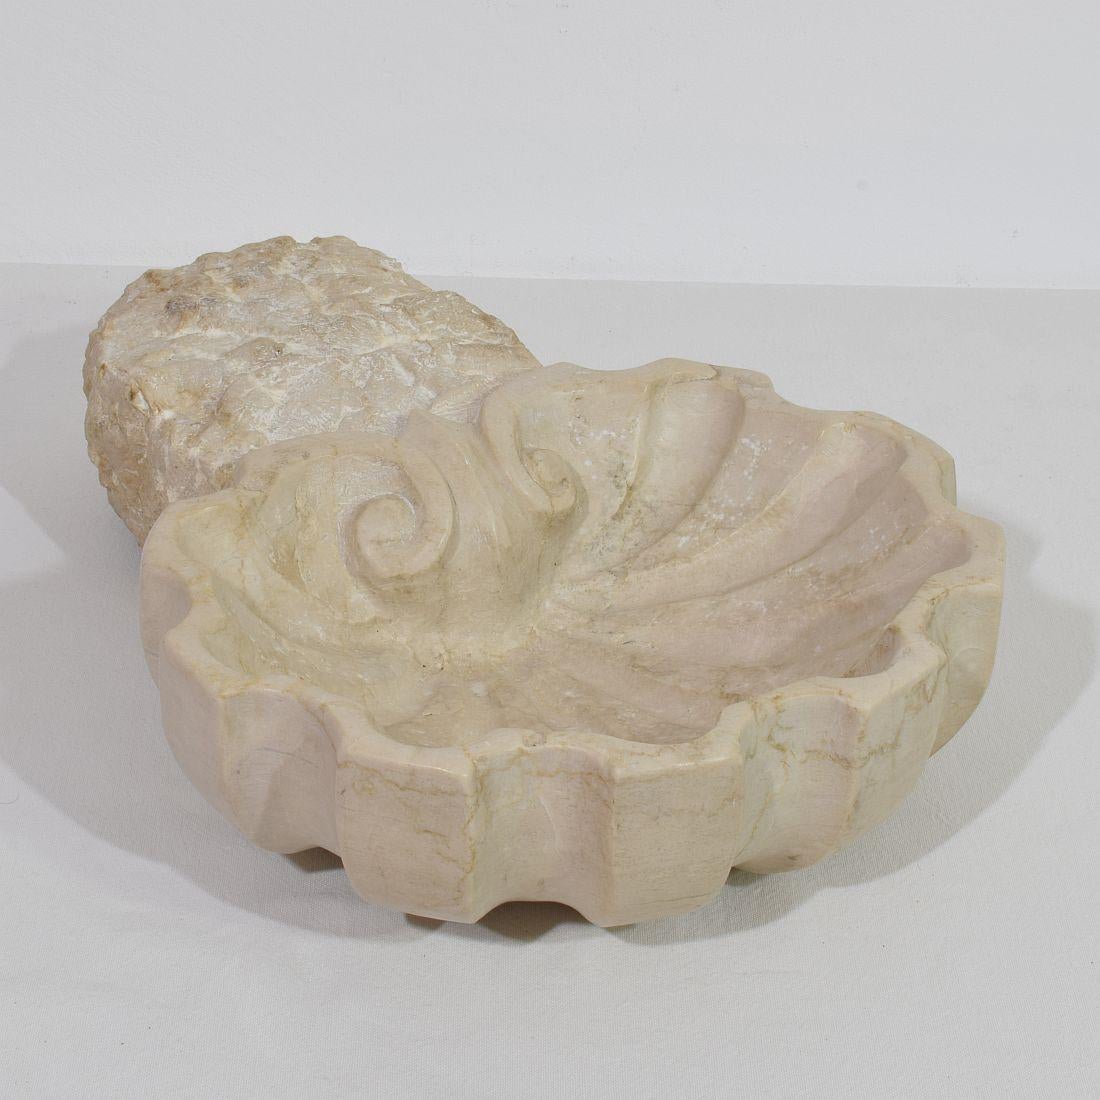 Beautiful Baroque hand carved limestone holy water font or stoup,
Unique and original period piece. Italy, circa 1750. Good but weathered condition just as it should.
Measures: H:10cm  W:29,5cm D:24-42cm 